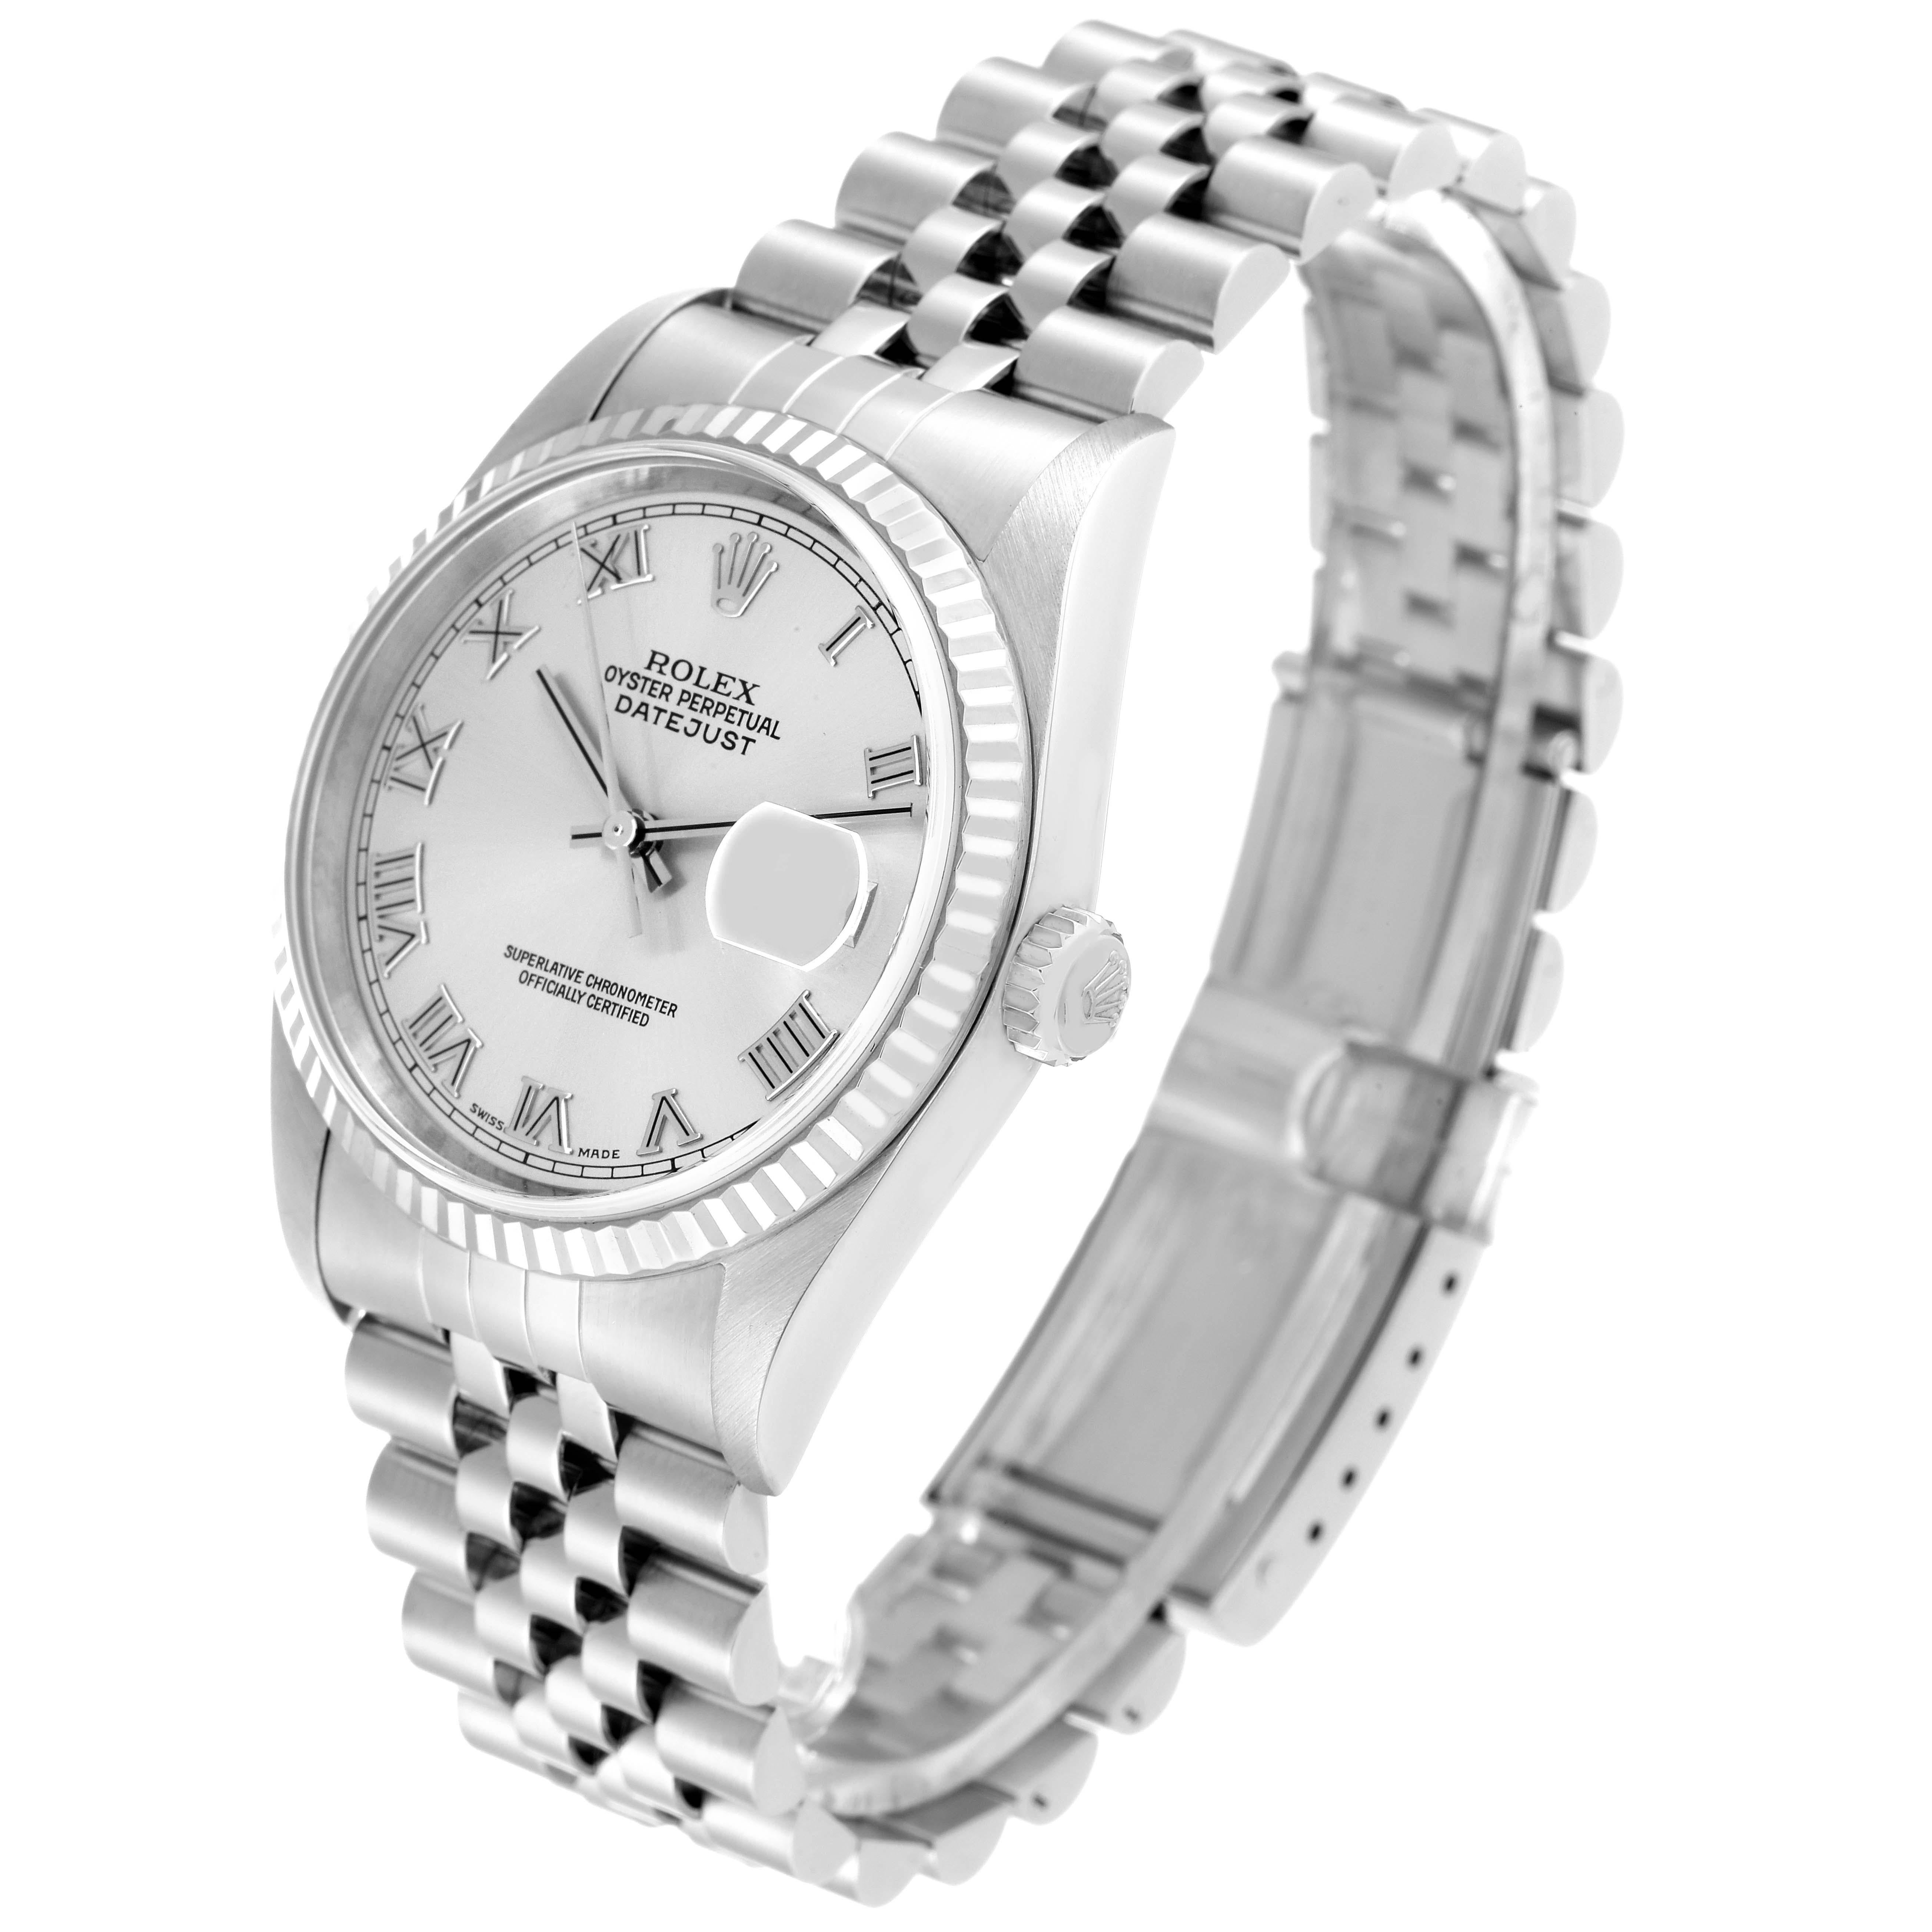 Men's Rolex Datejust 36 Steel White Gold Silver Roman Dial Mens Watch 16234 Box Papers